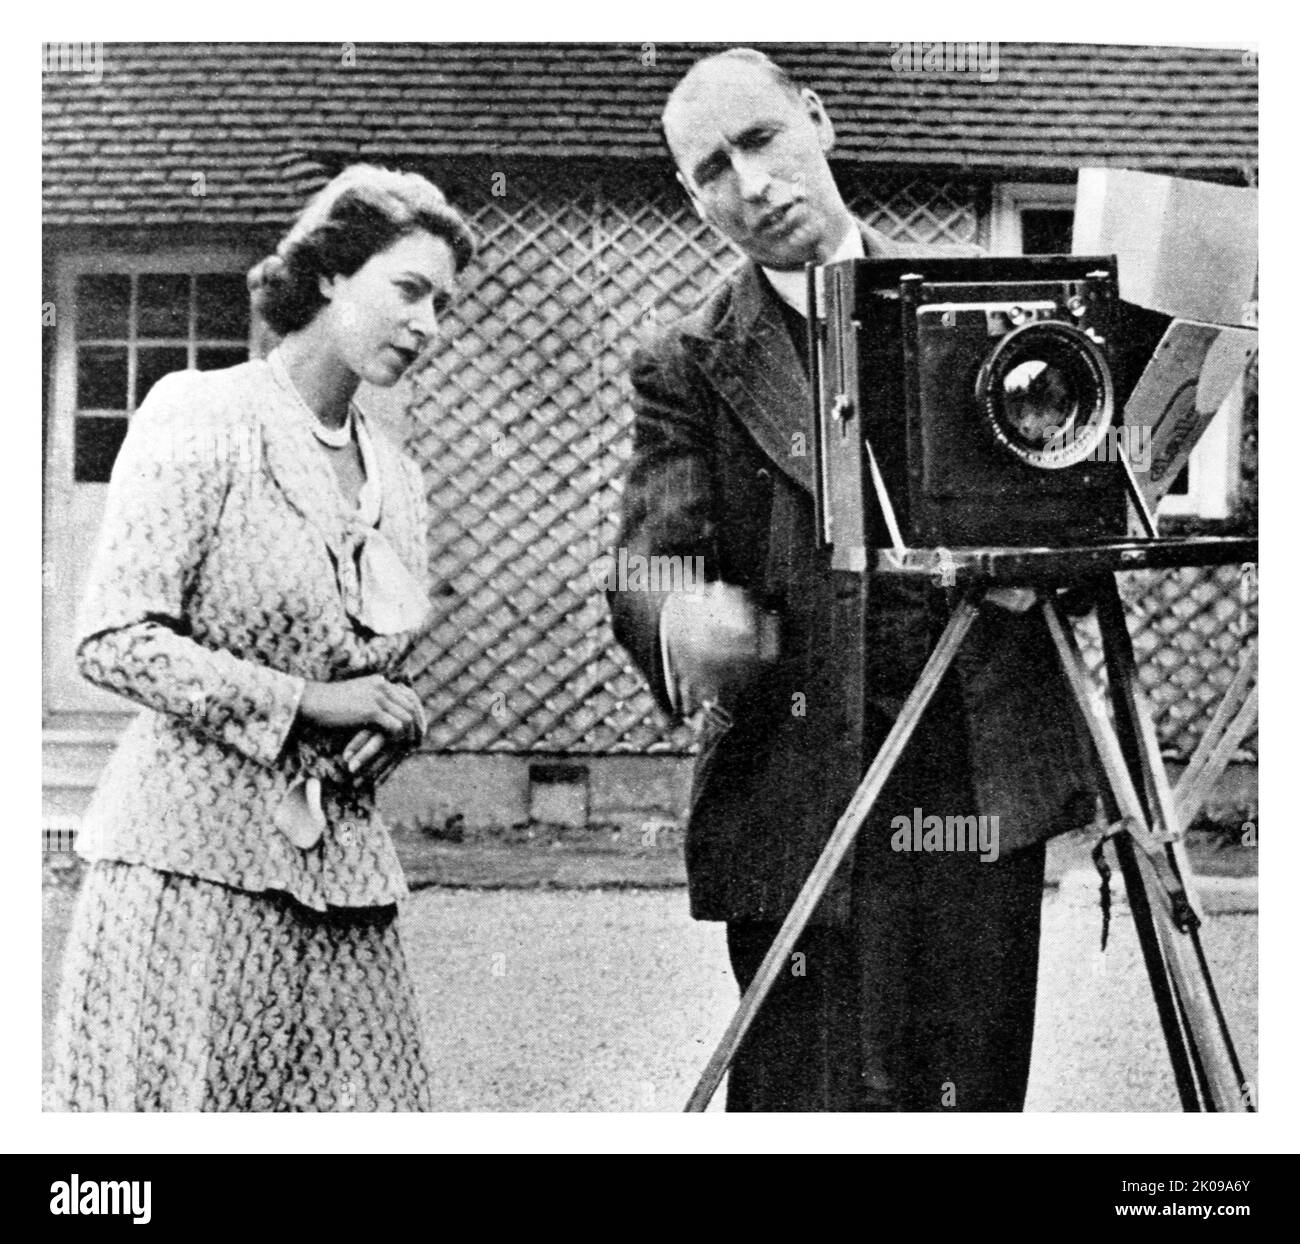 Princess Elizabeth inspecting a camera at the Windlesham Camera Club. Princess Elizabeth. Elizabeth II (Elizabeth Alexandra Mary; born 21 April 1926) is Queen of the United Kingdom and 15 other Commonwealth realms. She is the elder daughter of King George VI and Queen Elizabeth. Stock Photo